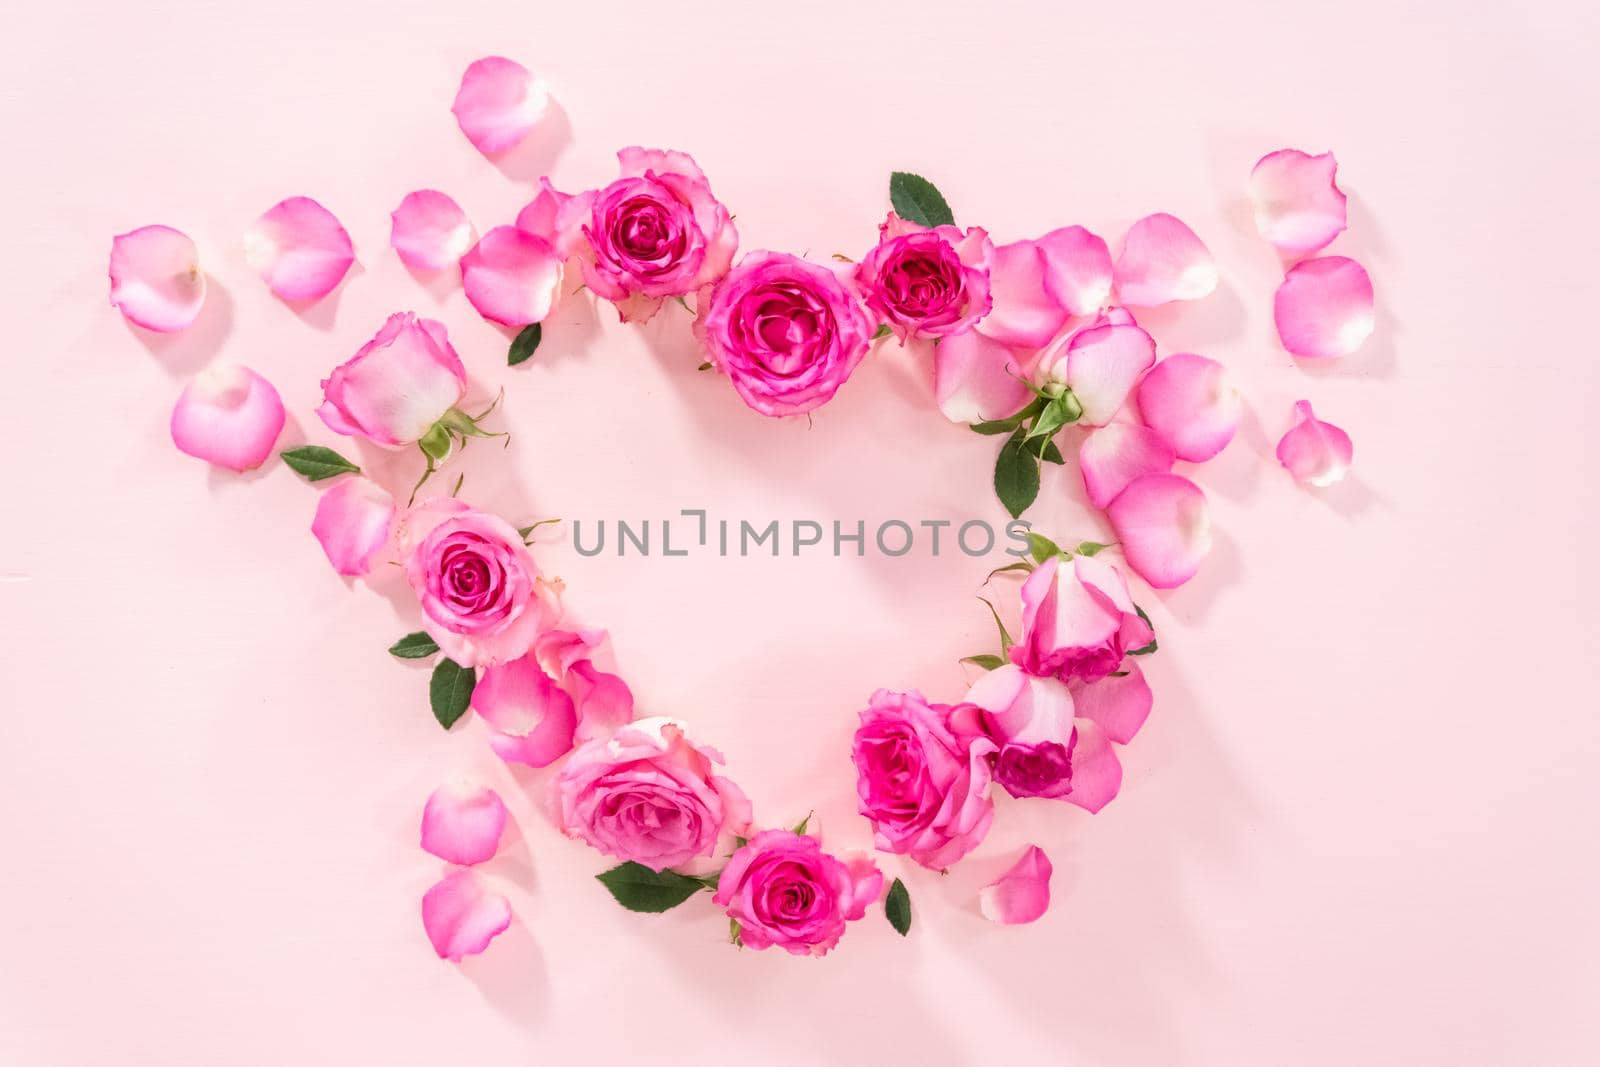 Flat lay. Heart shape made out of pink roses and rose petals on a pink background.